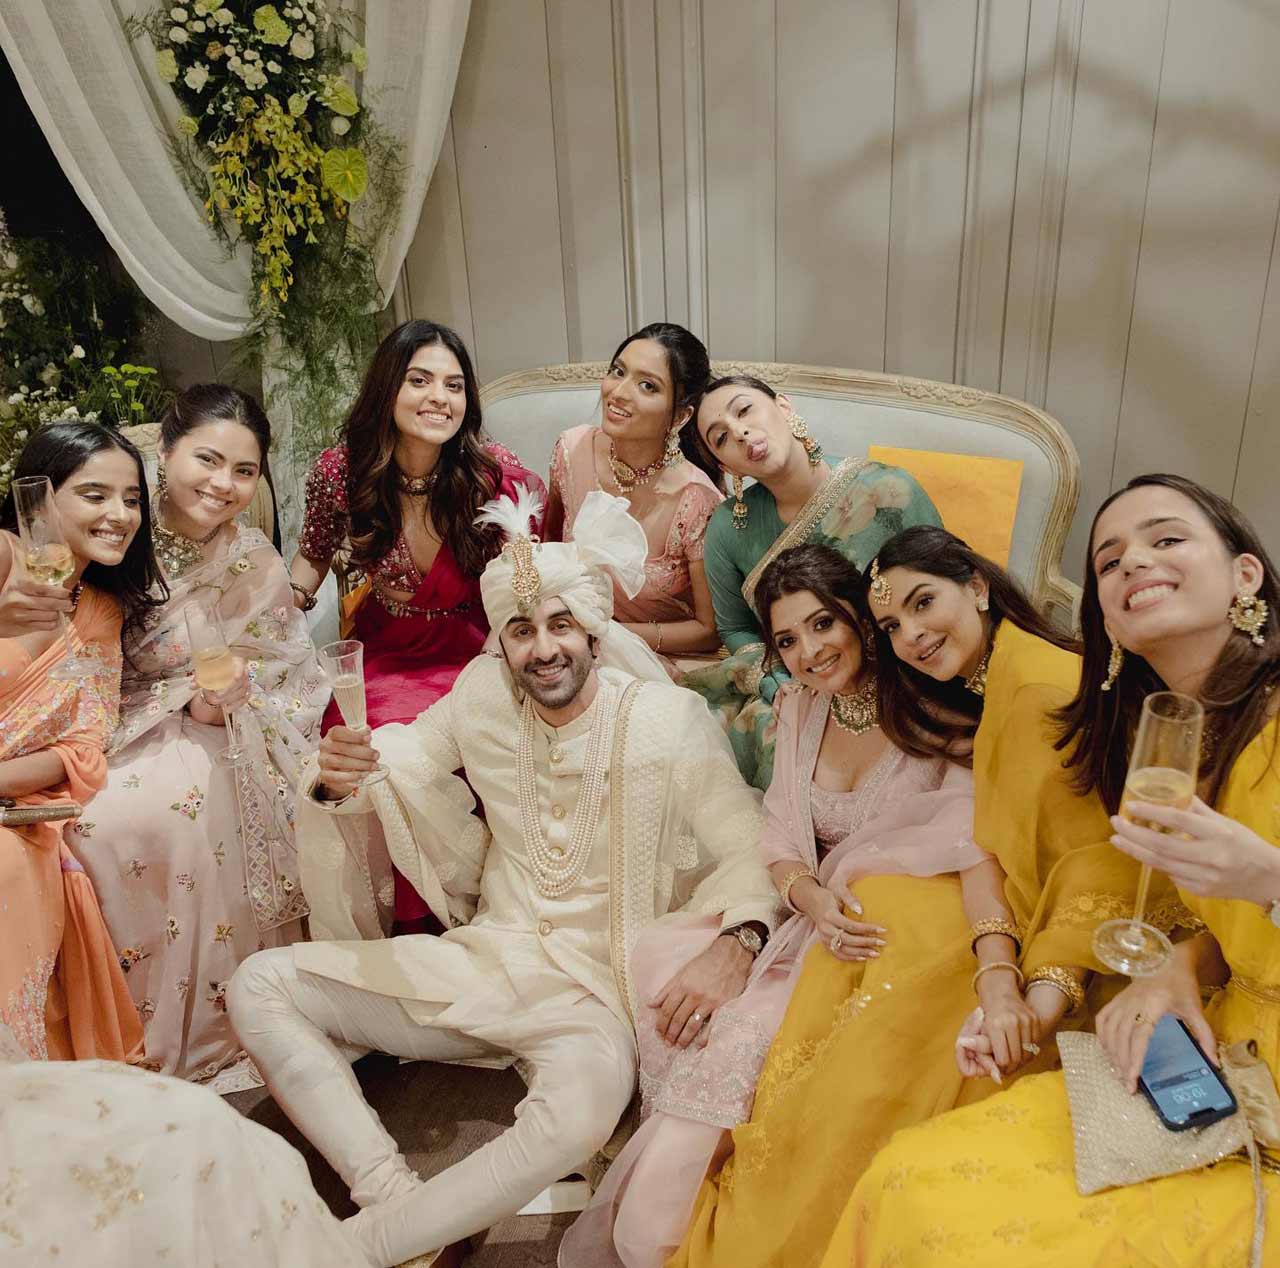 Incidentally, the first part of Ayan Mukerji's 'Brahmastra' is all set to arrive in cinemas on September 9. Post the wedding ceremony, Alia Bhatt took to her Instagram to share the love and joy with her followers